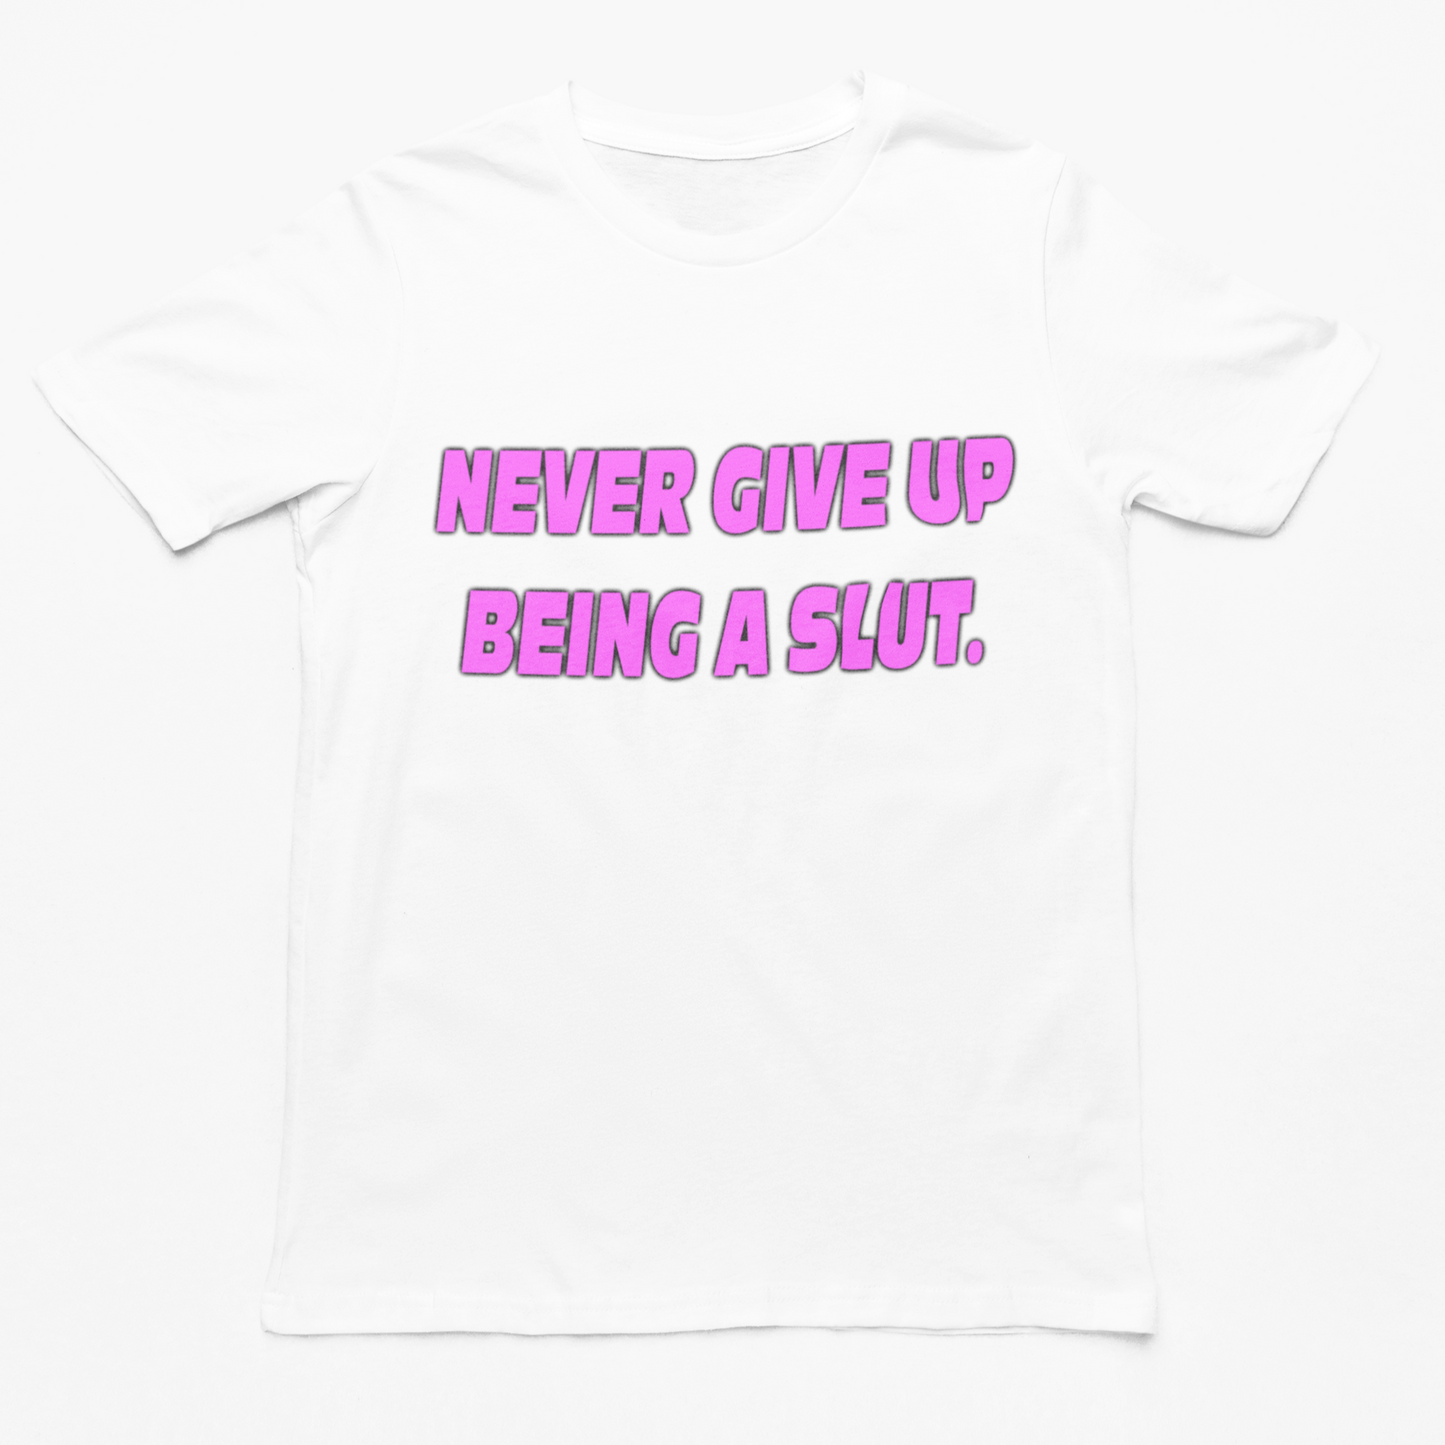 Never Give Up Being a Slut t-shirt